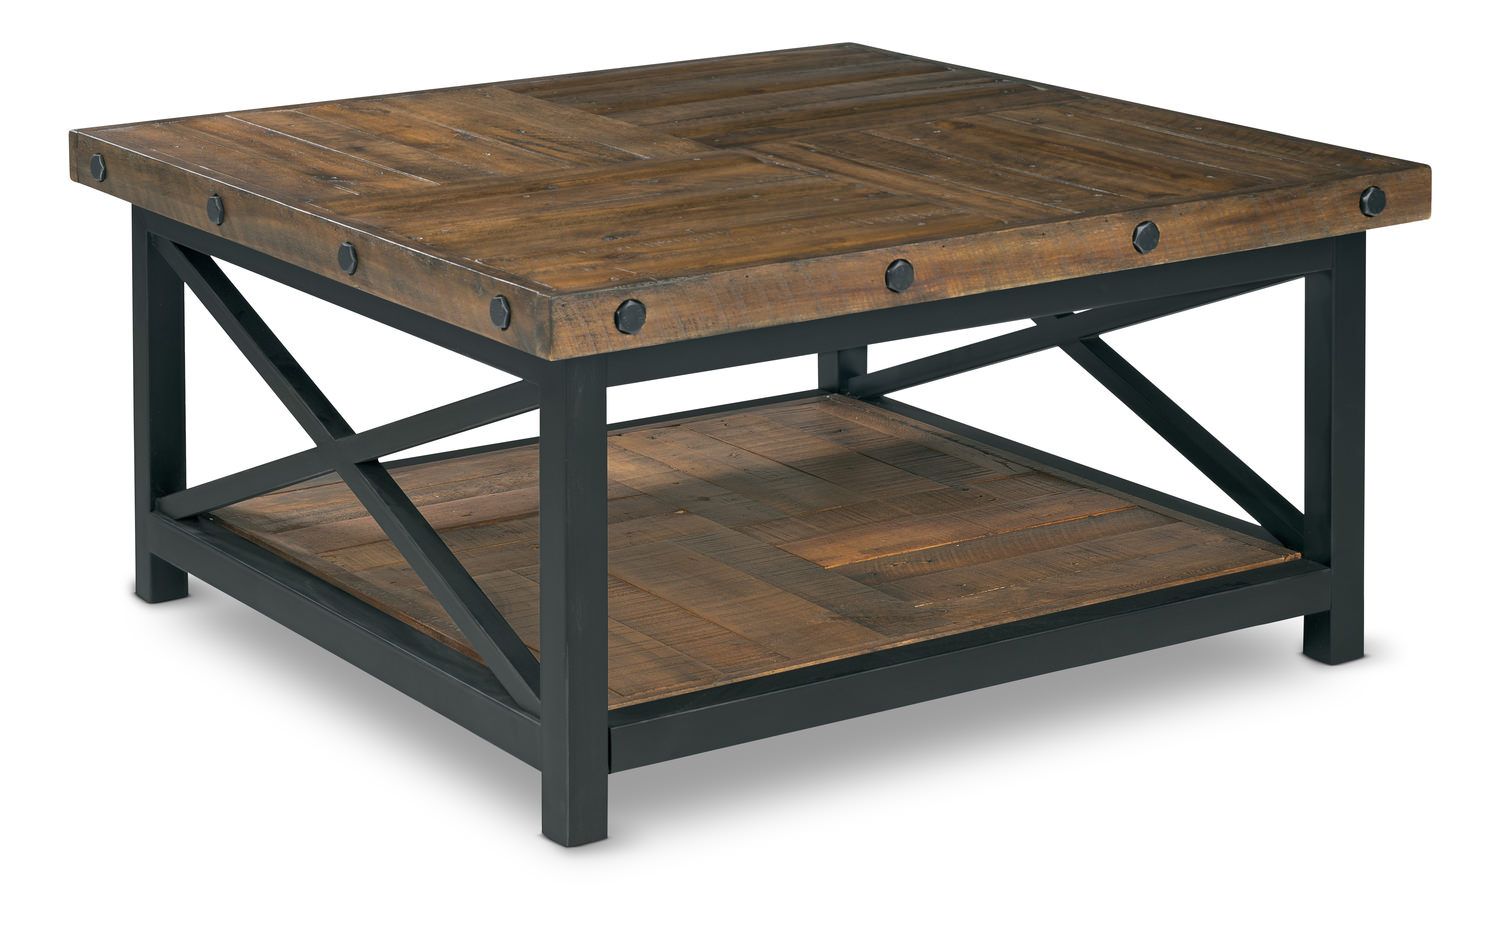 Carpenter Square Coffee Tableflexsteel | Hom Furniture Regarding Transitional Square Coffee Tables (View 14 of 15)